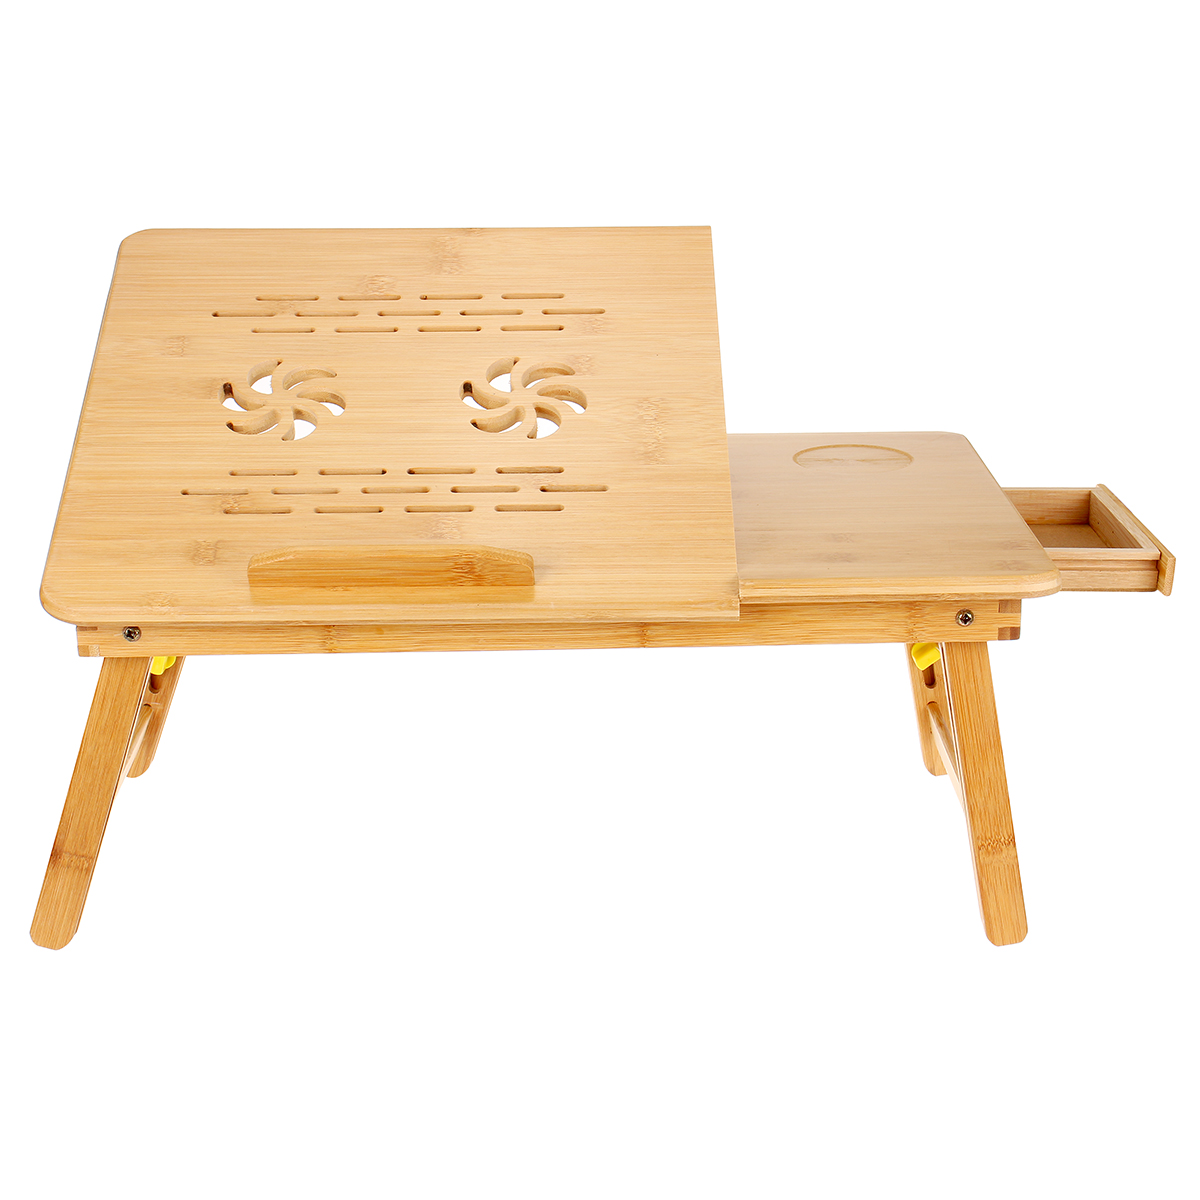 Bamboo-Laptop-Notebook-Bed-Desk-Table-Holder-Sofa-Tray-Cooling-Stand-With-Drawer-1805025-7